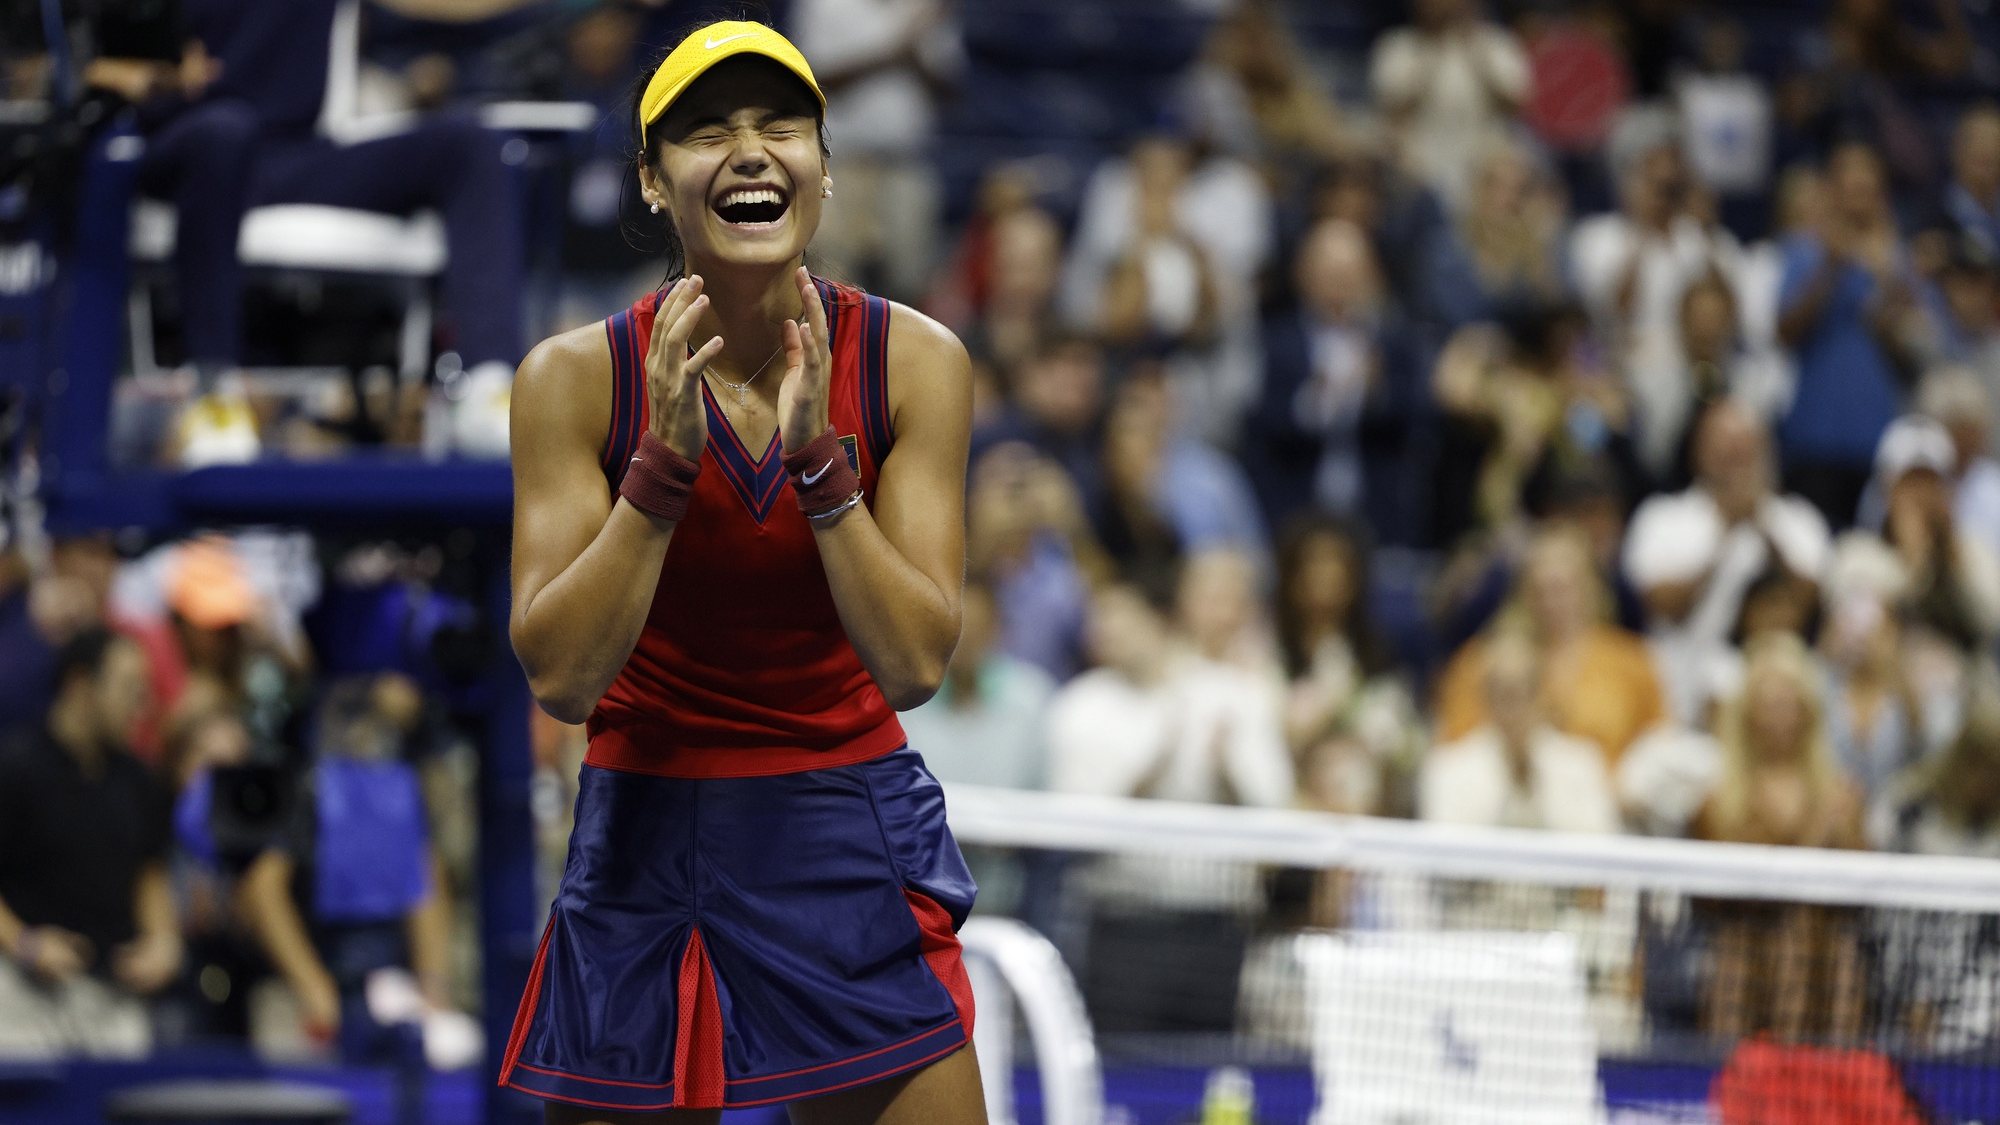 epa09458956 Emma Raducanu of Great Britain reacts after defeating Maria Sakkari of Greece during their semifinals round match on the eleventh day of the US Open Tennis Championships at the USTA National Tennis Center in Flushing Meadows, New York, USA, 09 September 2021. The US Open runs from 30 August through 12 September.  EPA/JUSTIN LANE